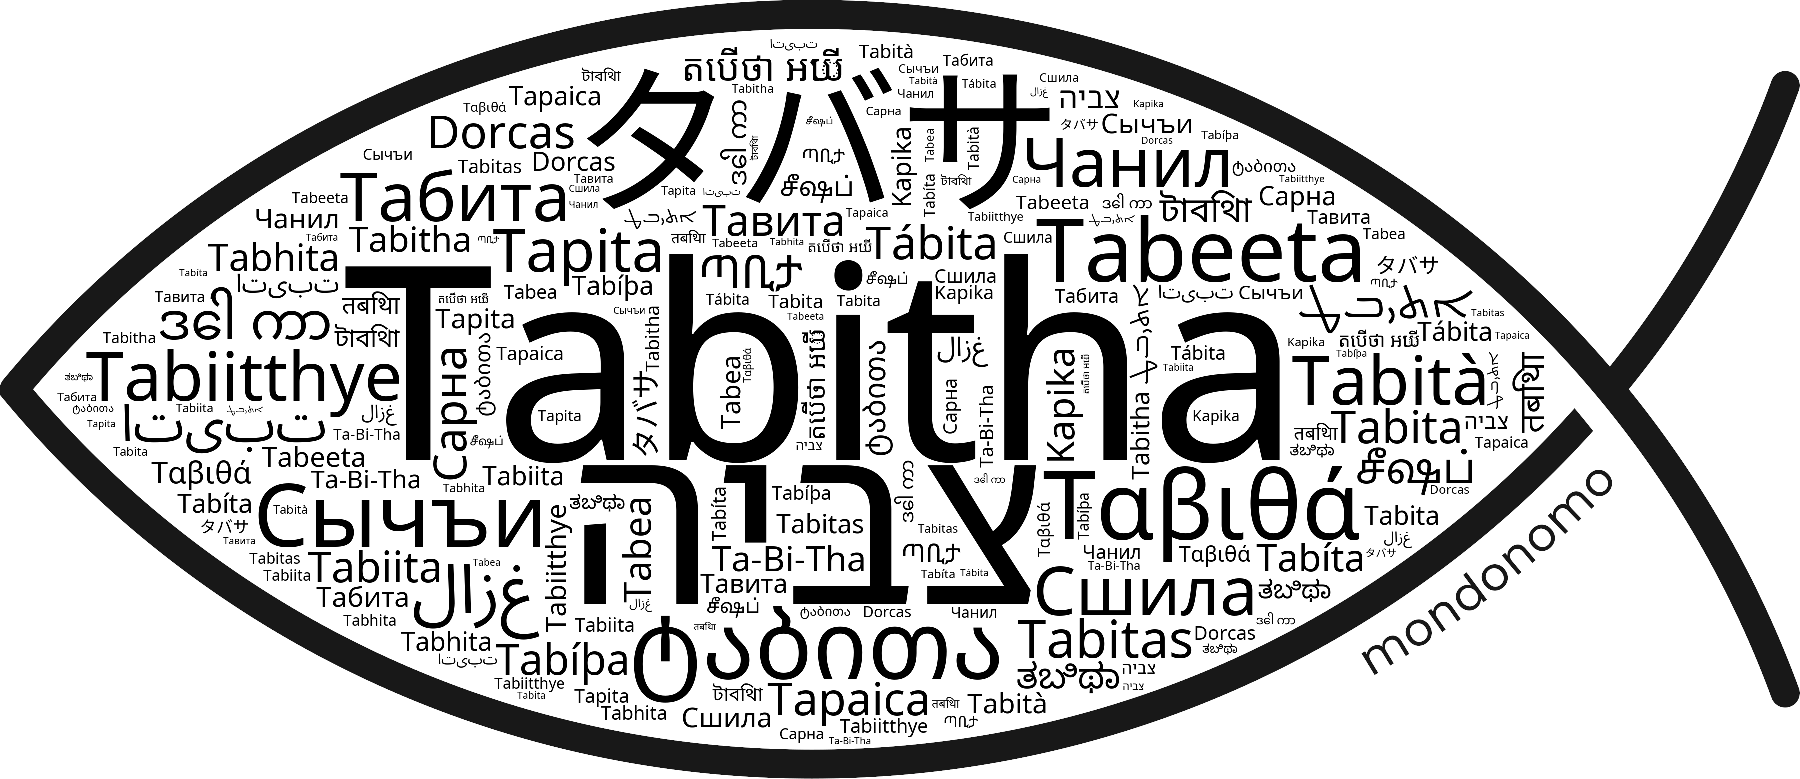 Name Tabitha in the world's Bibles